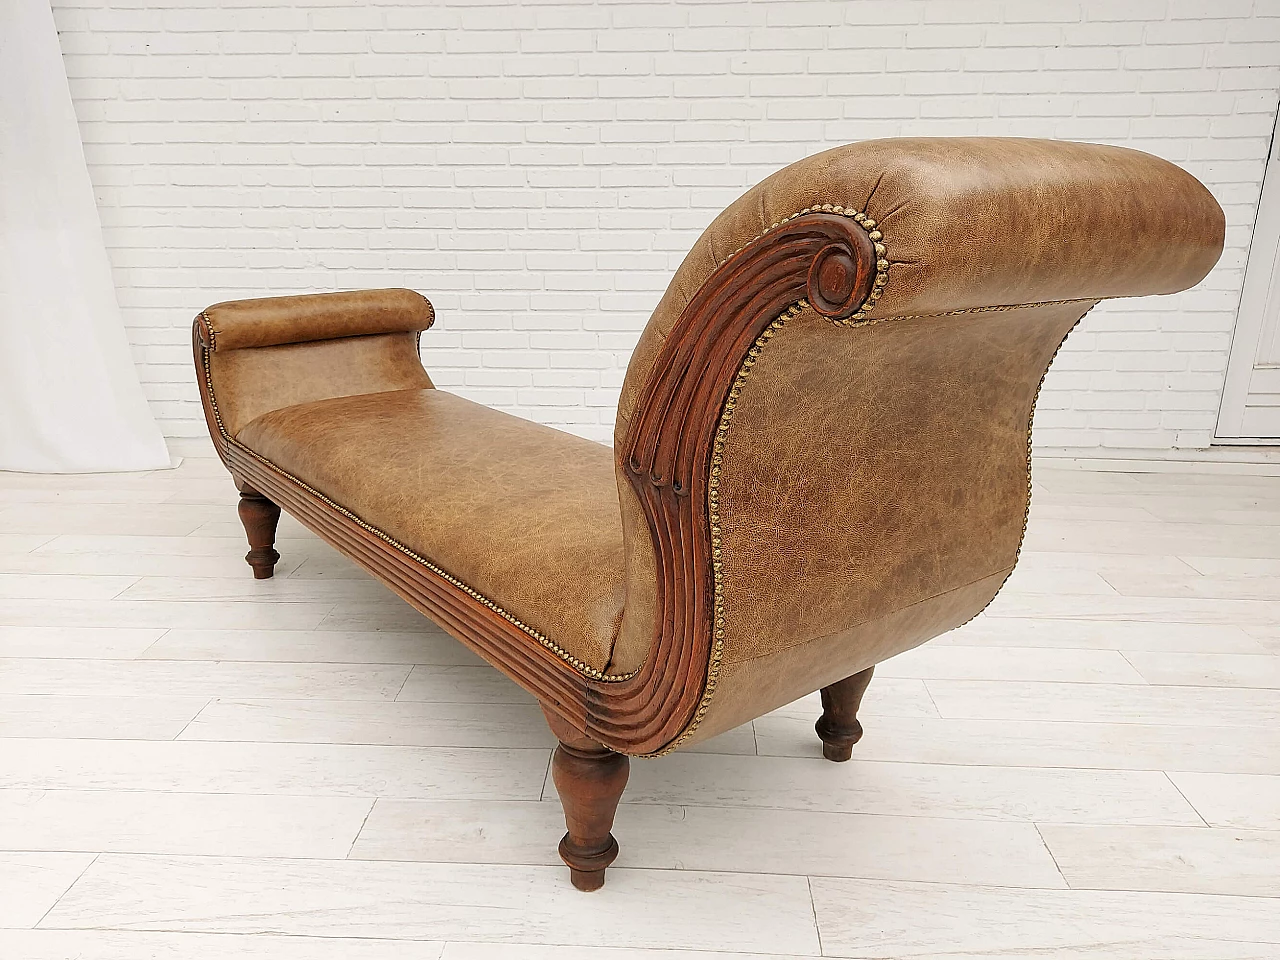 Danish antique chaise longue, early 20th century 1142180